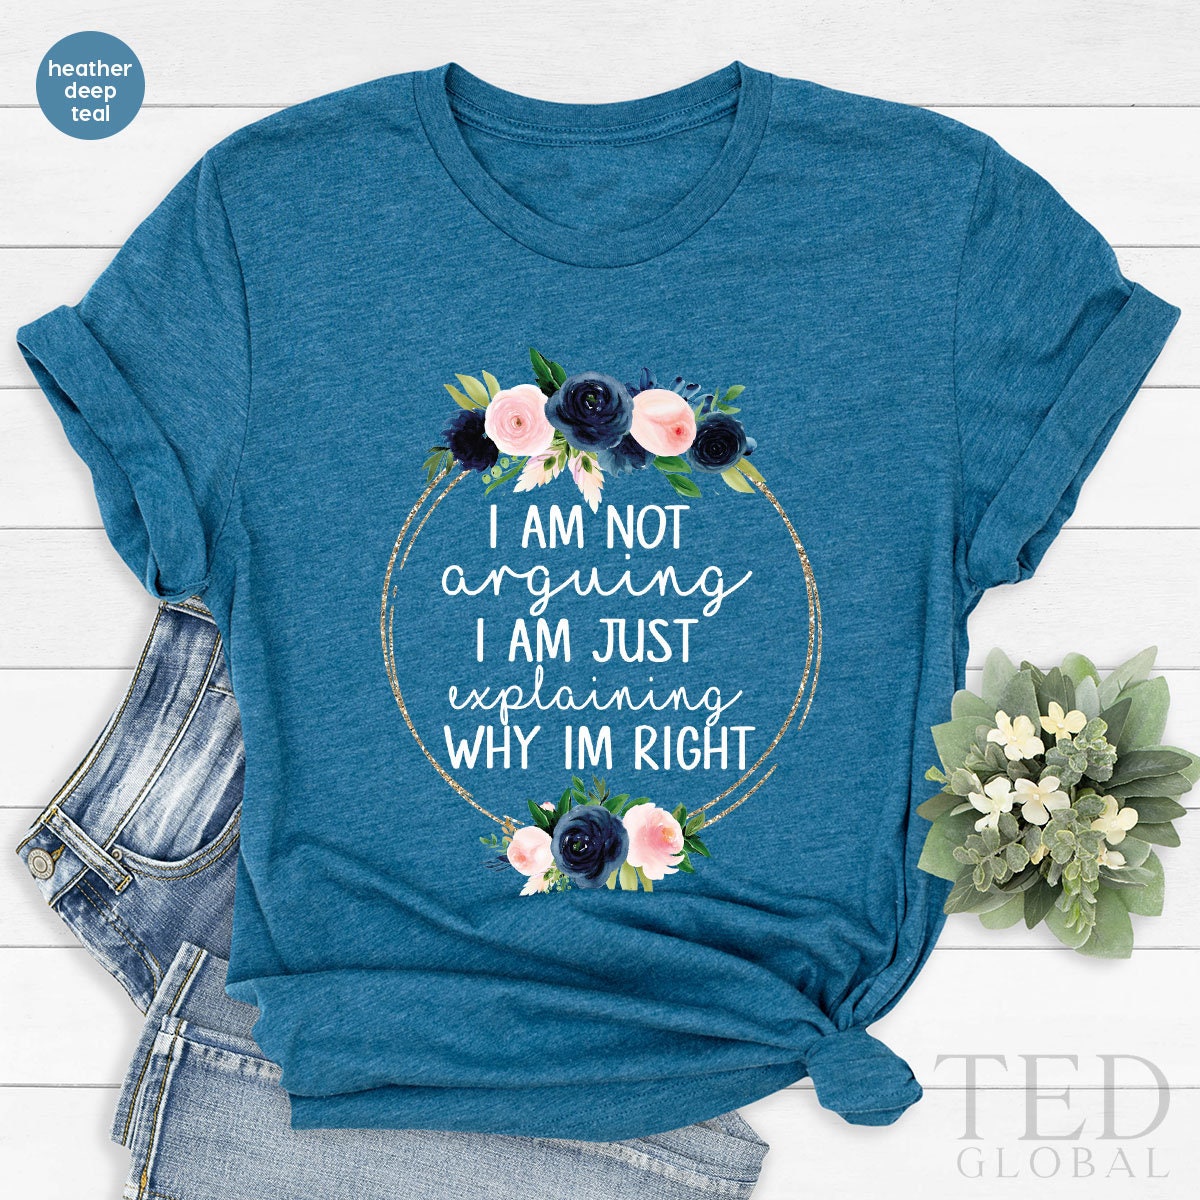 I Am Not Arguing Shirt, Sarcasm T Shirt, Funny Saying T Shirt, Cute Explain Shirts, Humorous Tee, Floral Argumental T-Shirt, Gift For Her - Fastdeliverytees.com